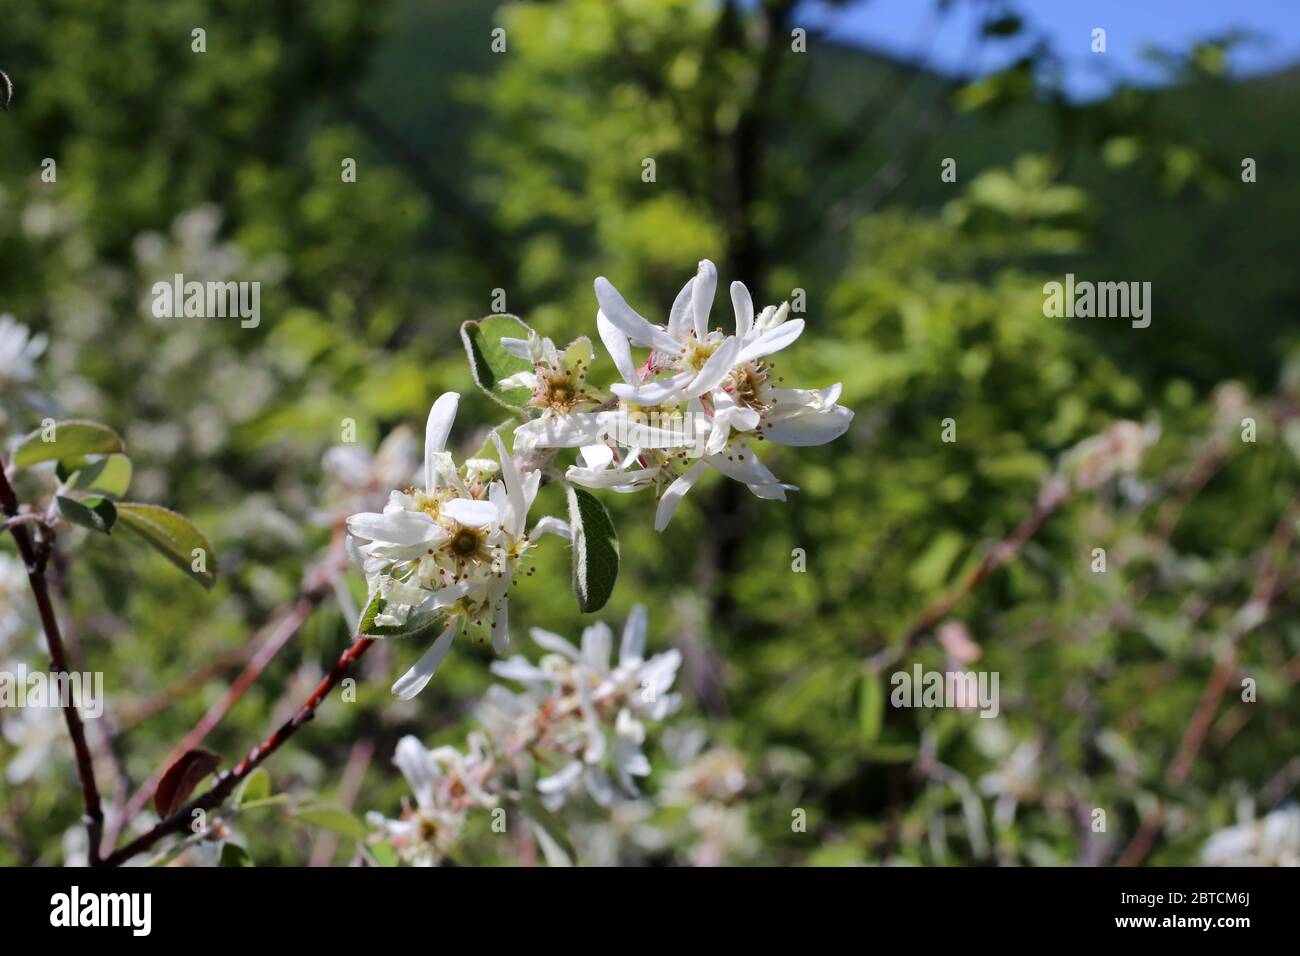 Amelanchier Ovalis June Berry Wild Plant Shot In The Spring Stock Photo Alamy